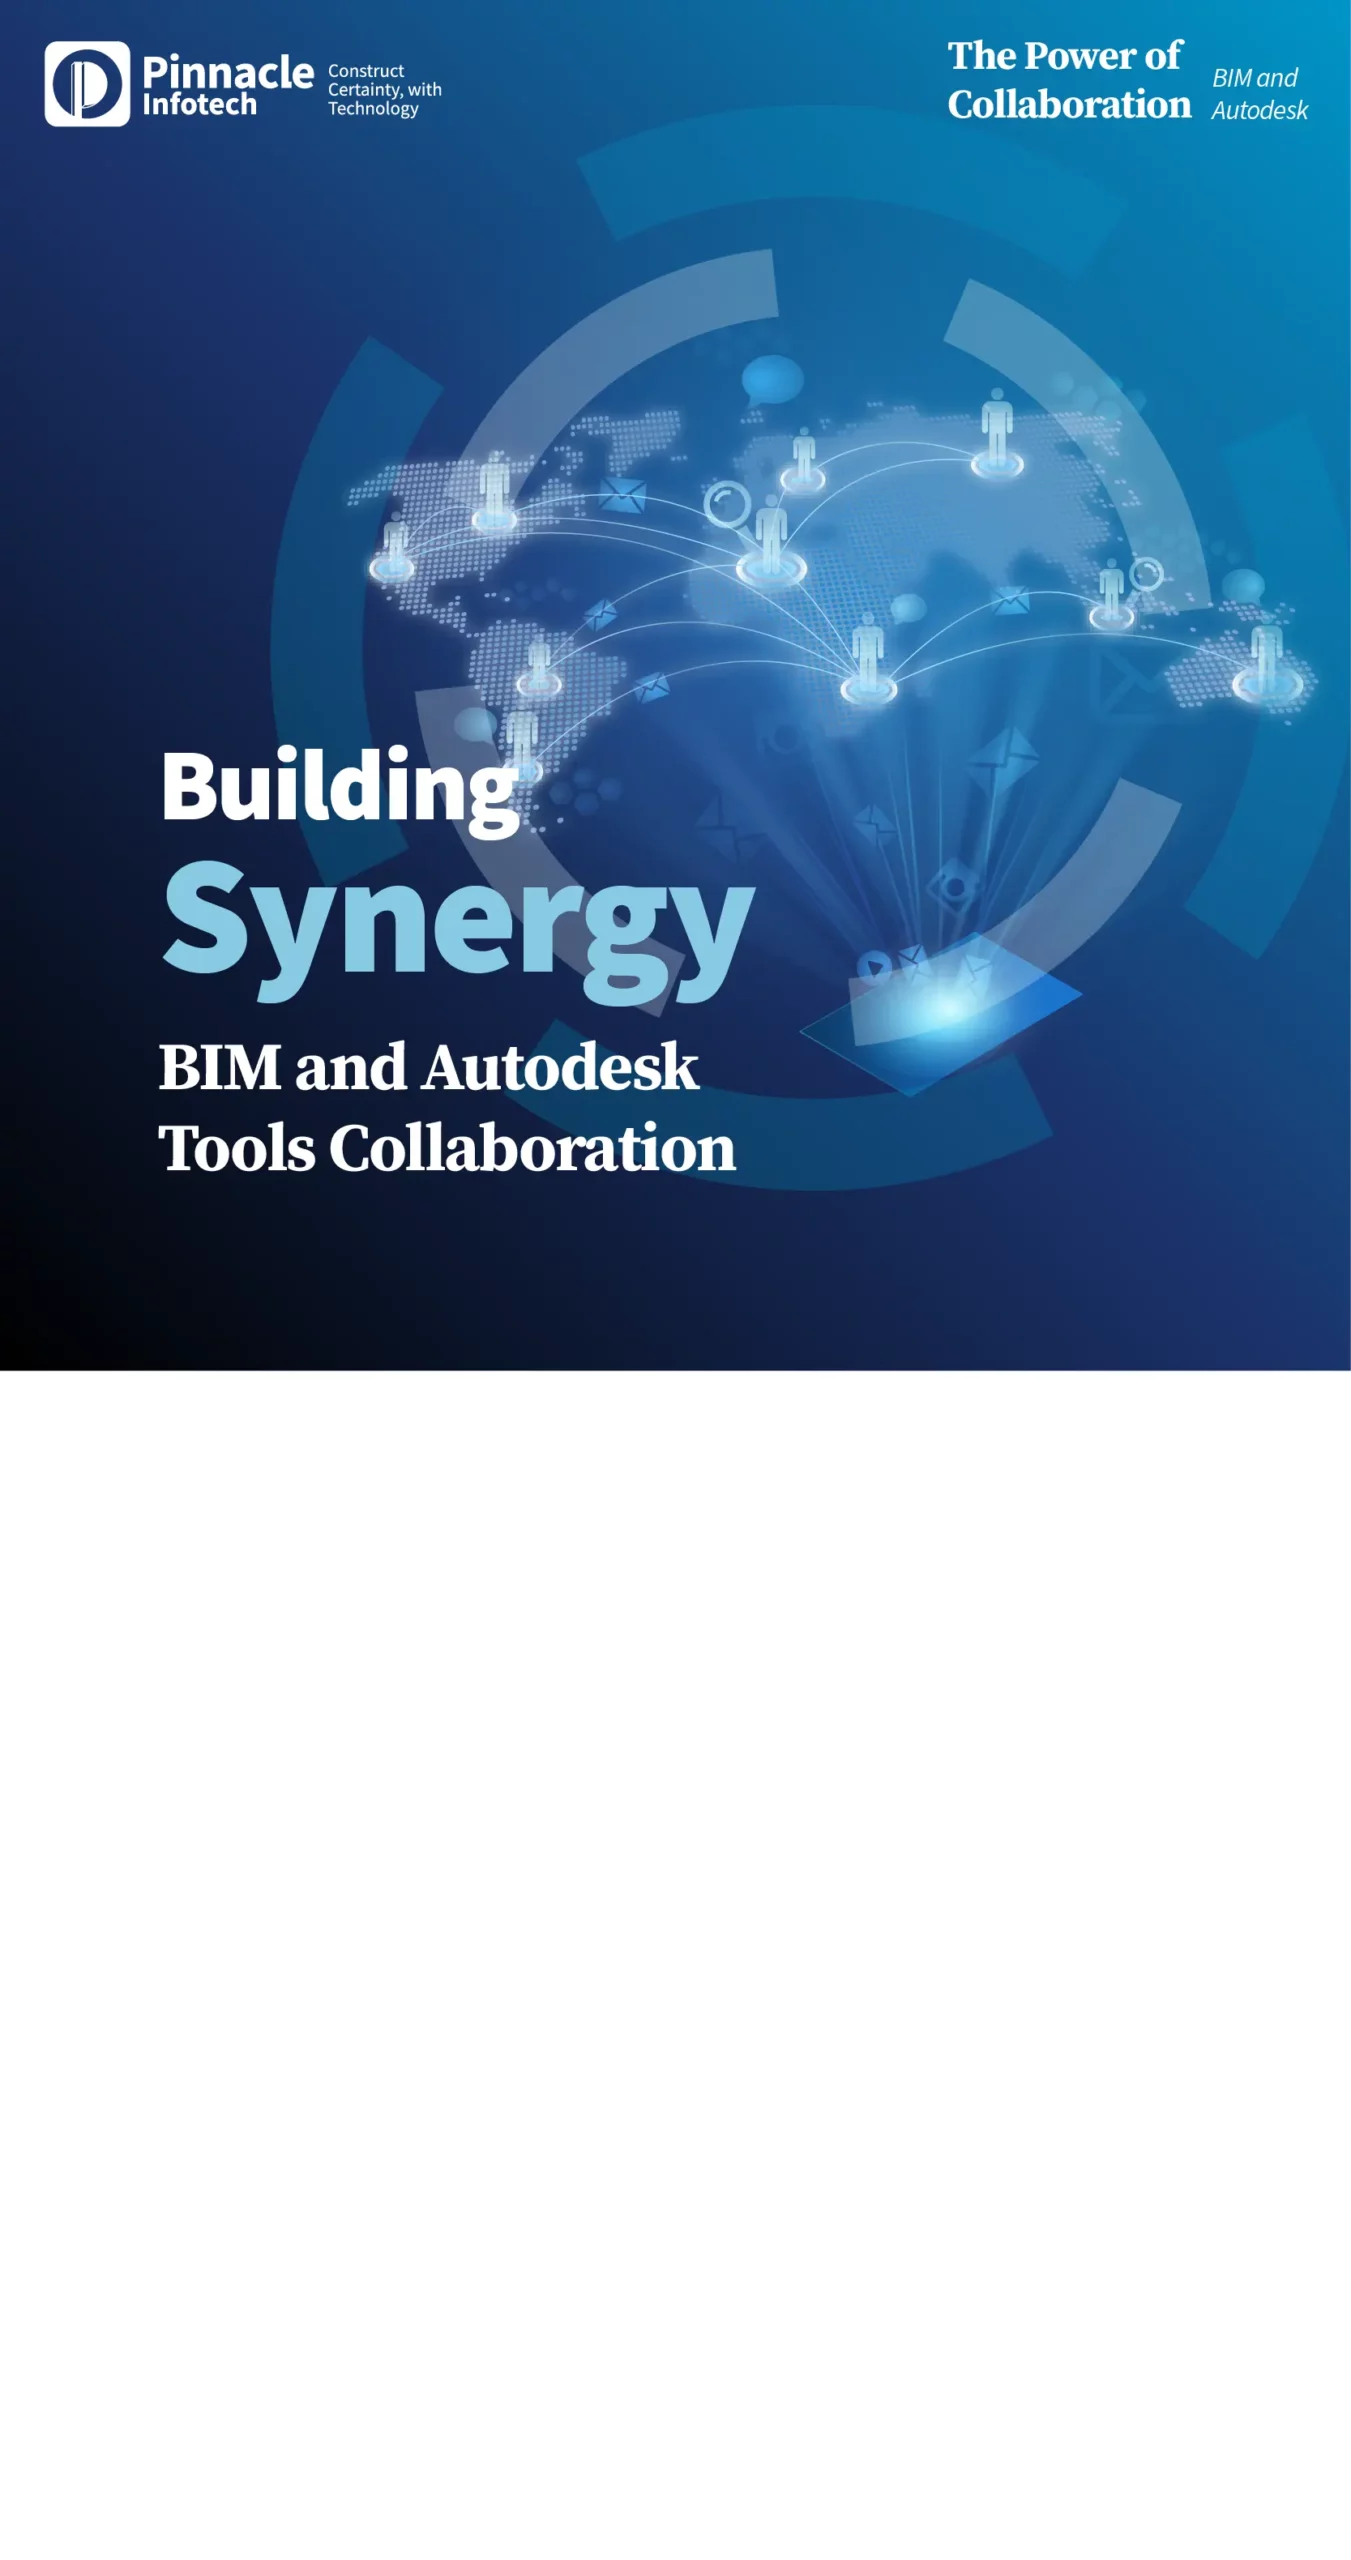 BIM and Autodesk tools collaboration cover image